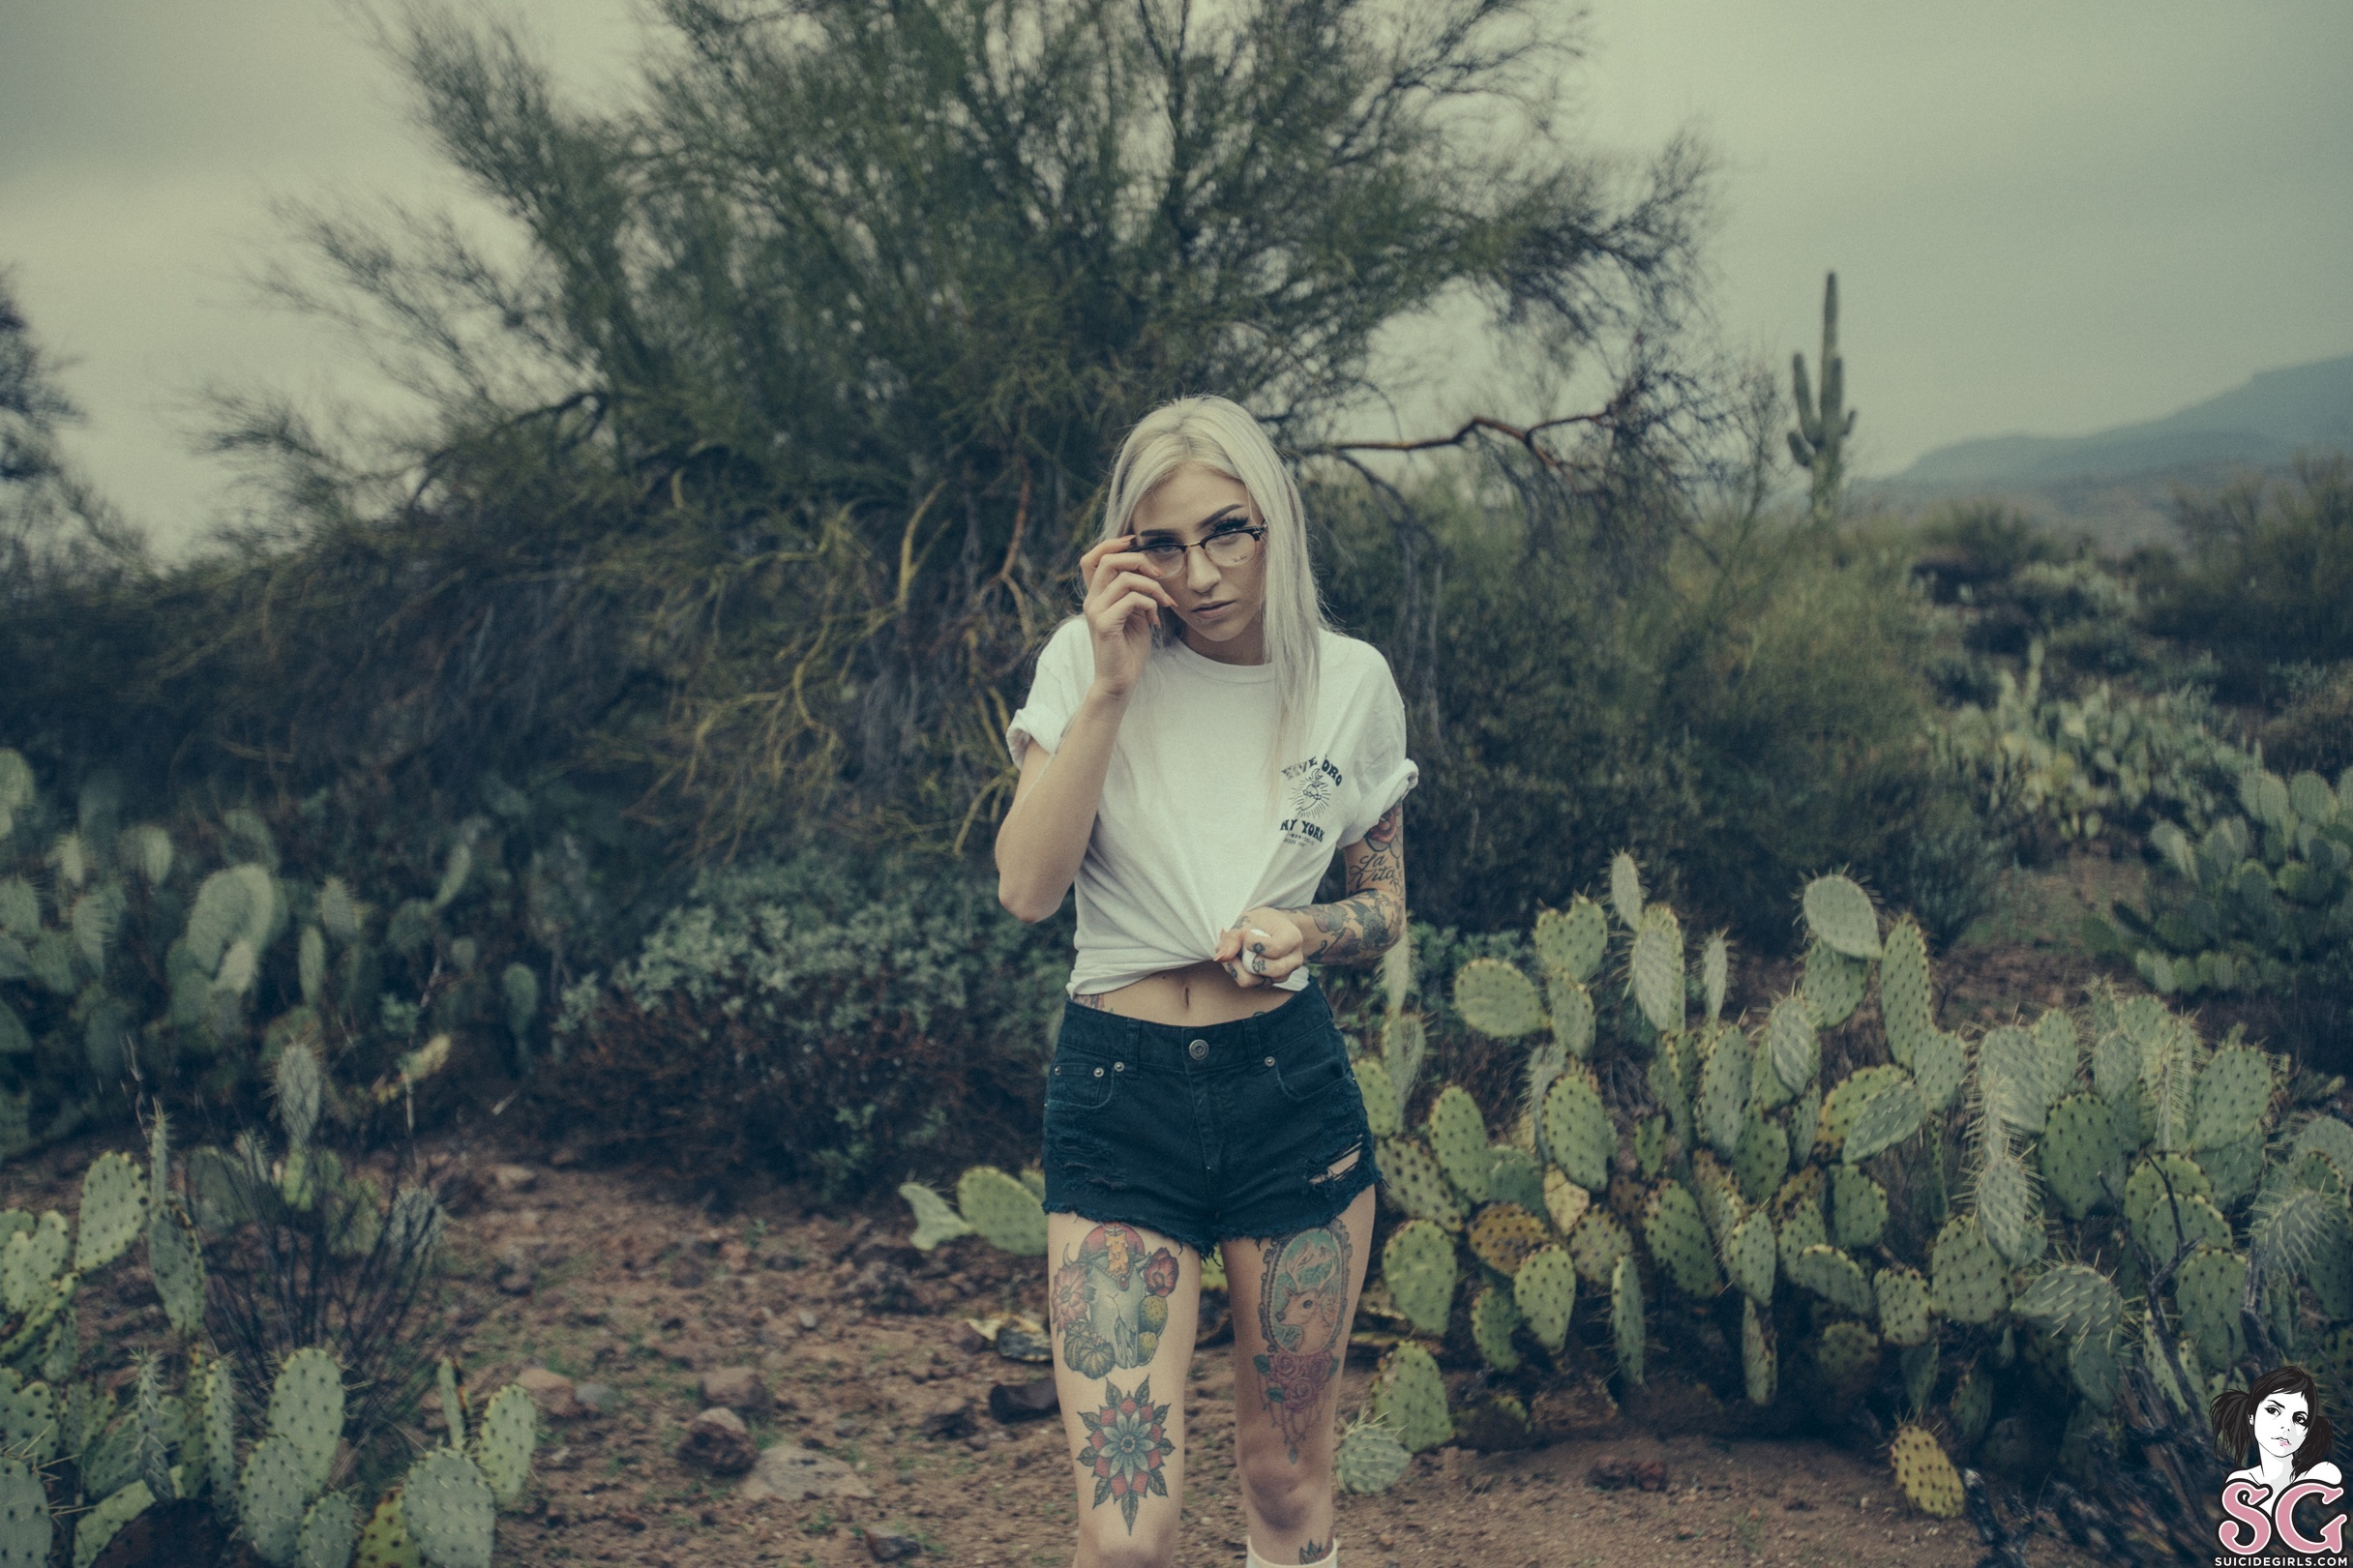 People 2432x1621 Suicide Girls whitehead Ivory Suicide tattoo cactus plants desert glasses women watermarked inked girls outdoors T-shirt white tops